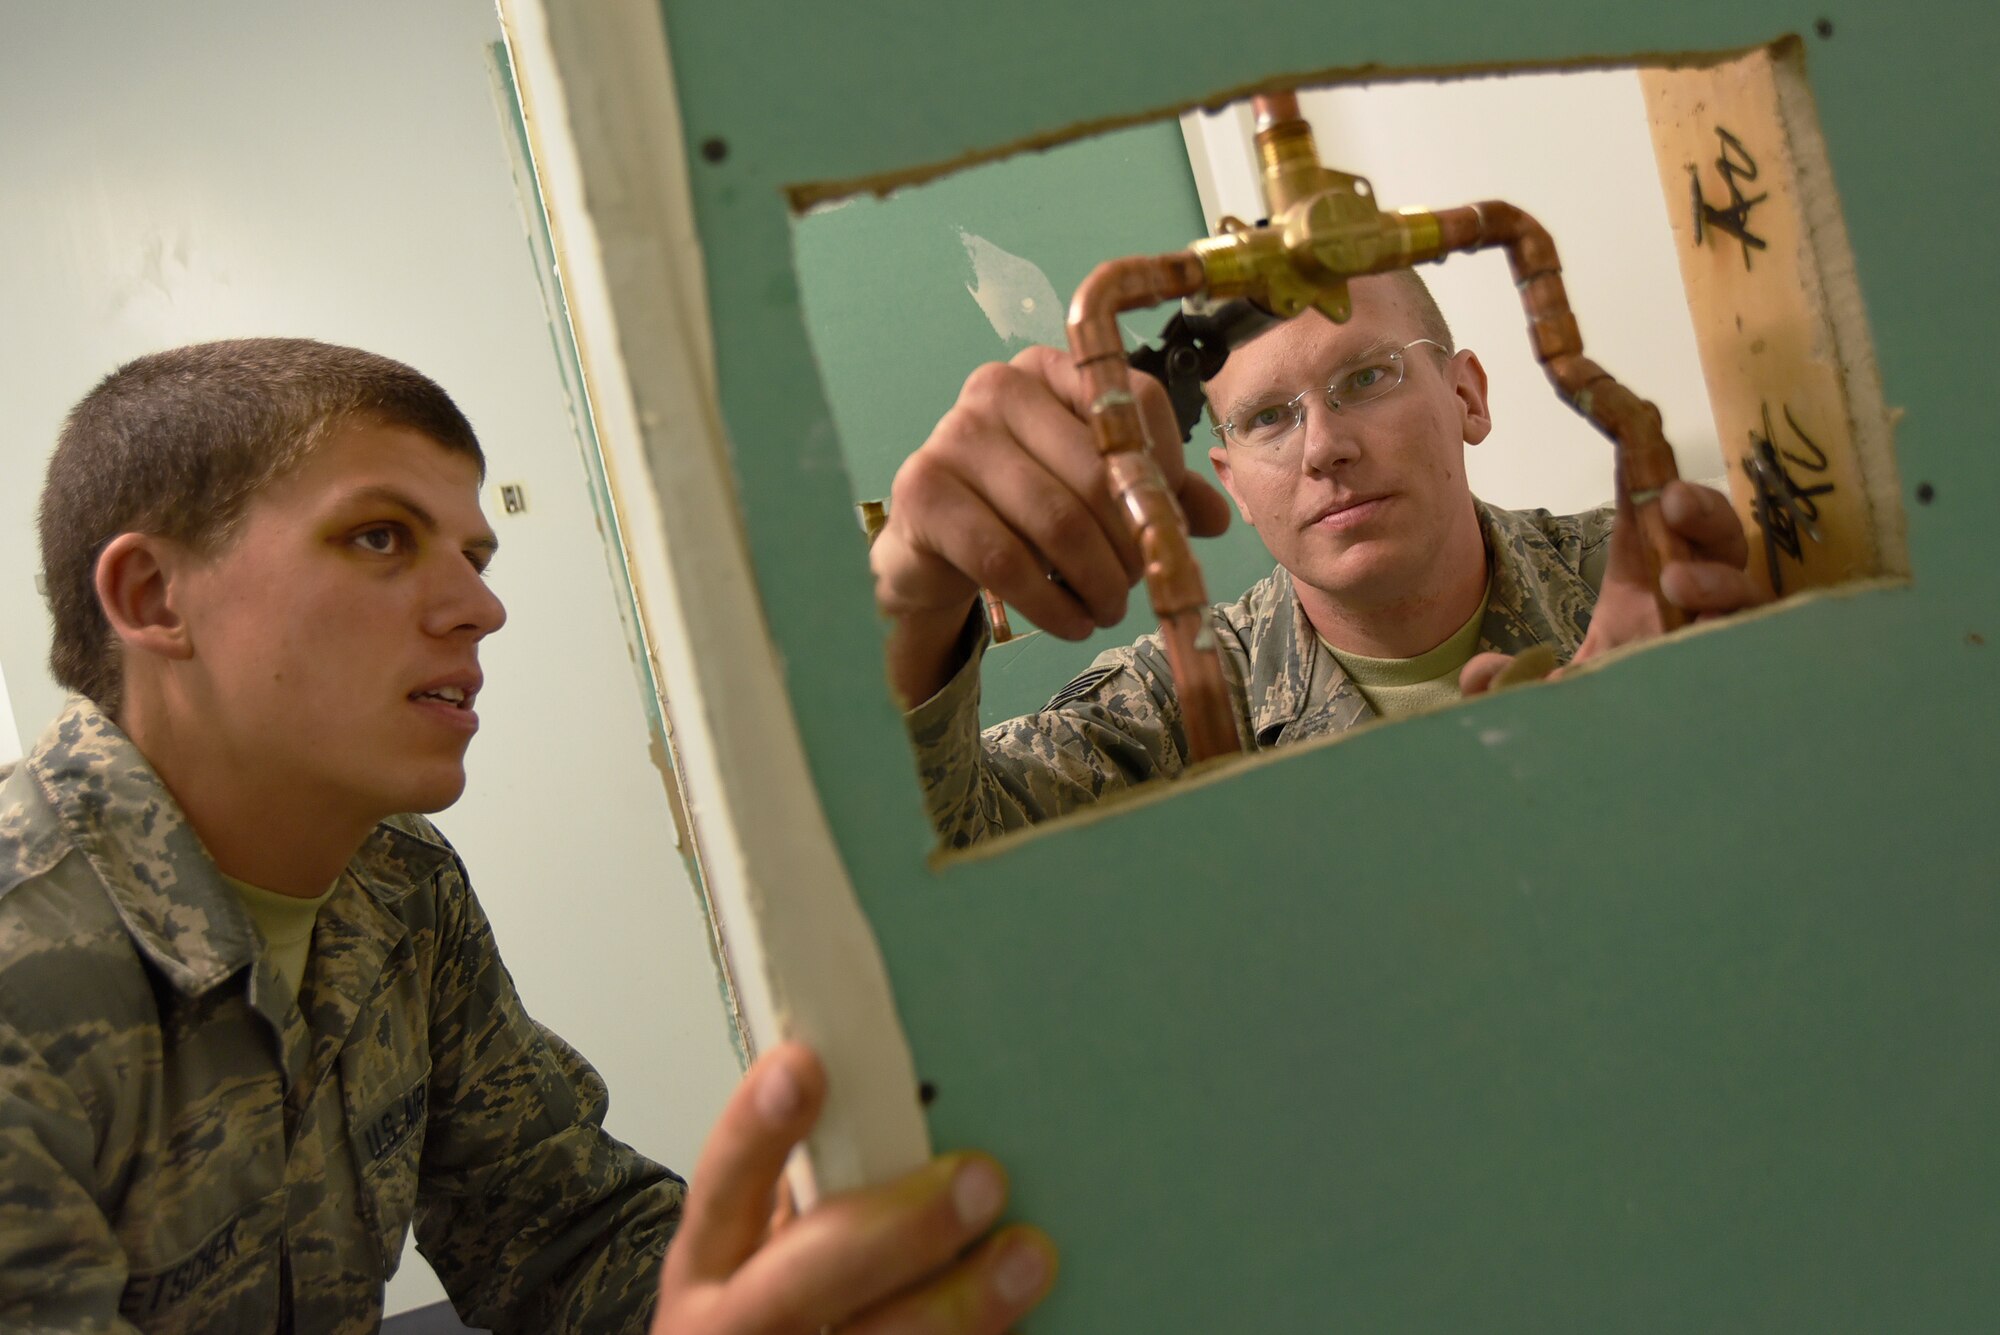 Oregon Air National Guard Staff Sgt. Benjamin Schultz (right), makes adjustments to newly installed plumbing fixtures, while Airman 1st Class Joshua Bietschek (left), observes the procedures as part of his ongoing training, as the two members assigned to the 142nd Civil Engineer Squadron work on a variety of construction and repair projects during their Deployment For Training (DFT) in Yellowknife, Northwest Territories, Canada, July 21, 2017. The Oregon Airmen are also collaborating with Canadian Armed Forces members from Cold Lake, Alberta, who are also deployed to Yellowknife for training. (U.S. Air National Guard photo/Master Sgt. John Hughel, 142nd Fighter Wing Public Affairs)